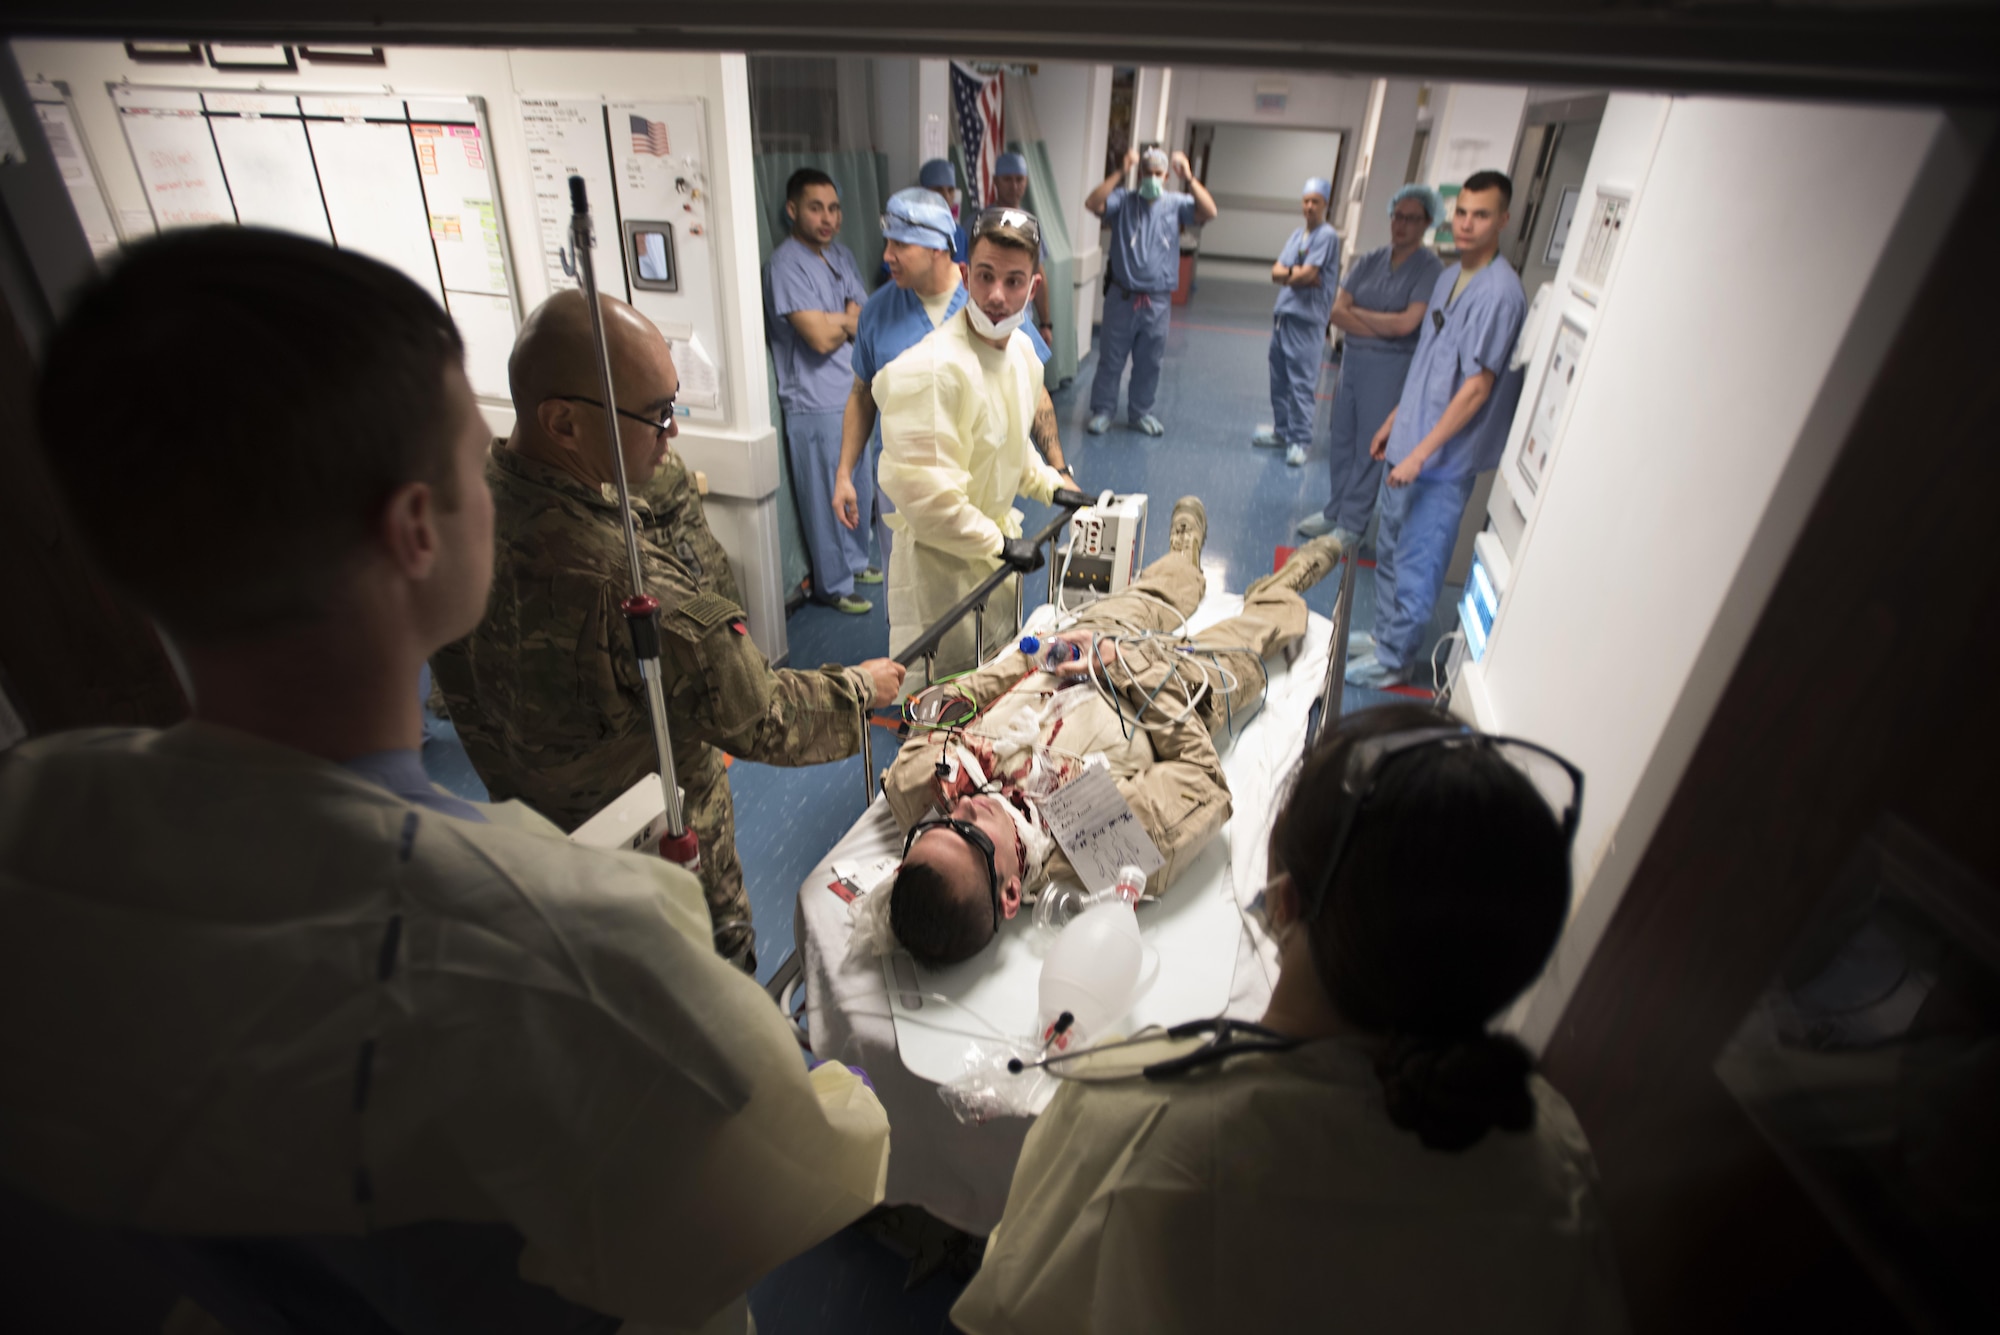 U.S. Army Sgt. Seth Pilkington, 233rd Military Police Company, is taken to the operating room during a mass casualty exercise Oct. 30, 2016 at the Craig Joint Theater Hospital, Bagram Airfield, Afghanistan. Thirteen patients were medically evacuated by helicopter from the embassy in Kabul for the exercise. (U.S. Air Force photo by Staff Sgt. Katherine Spessa)
